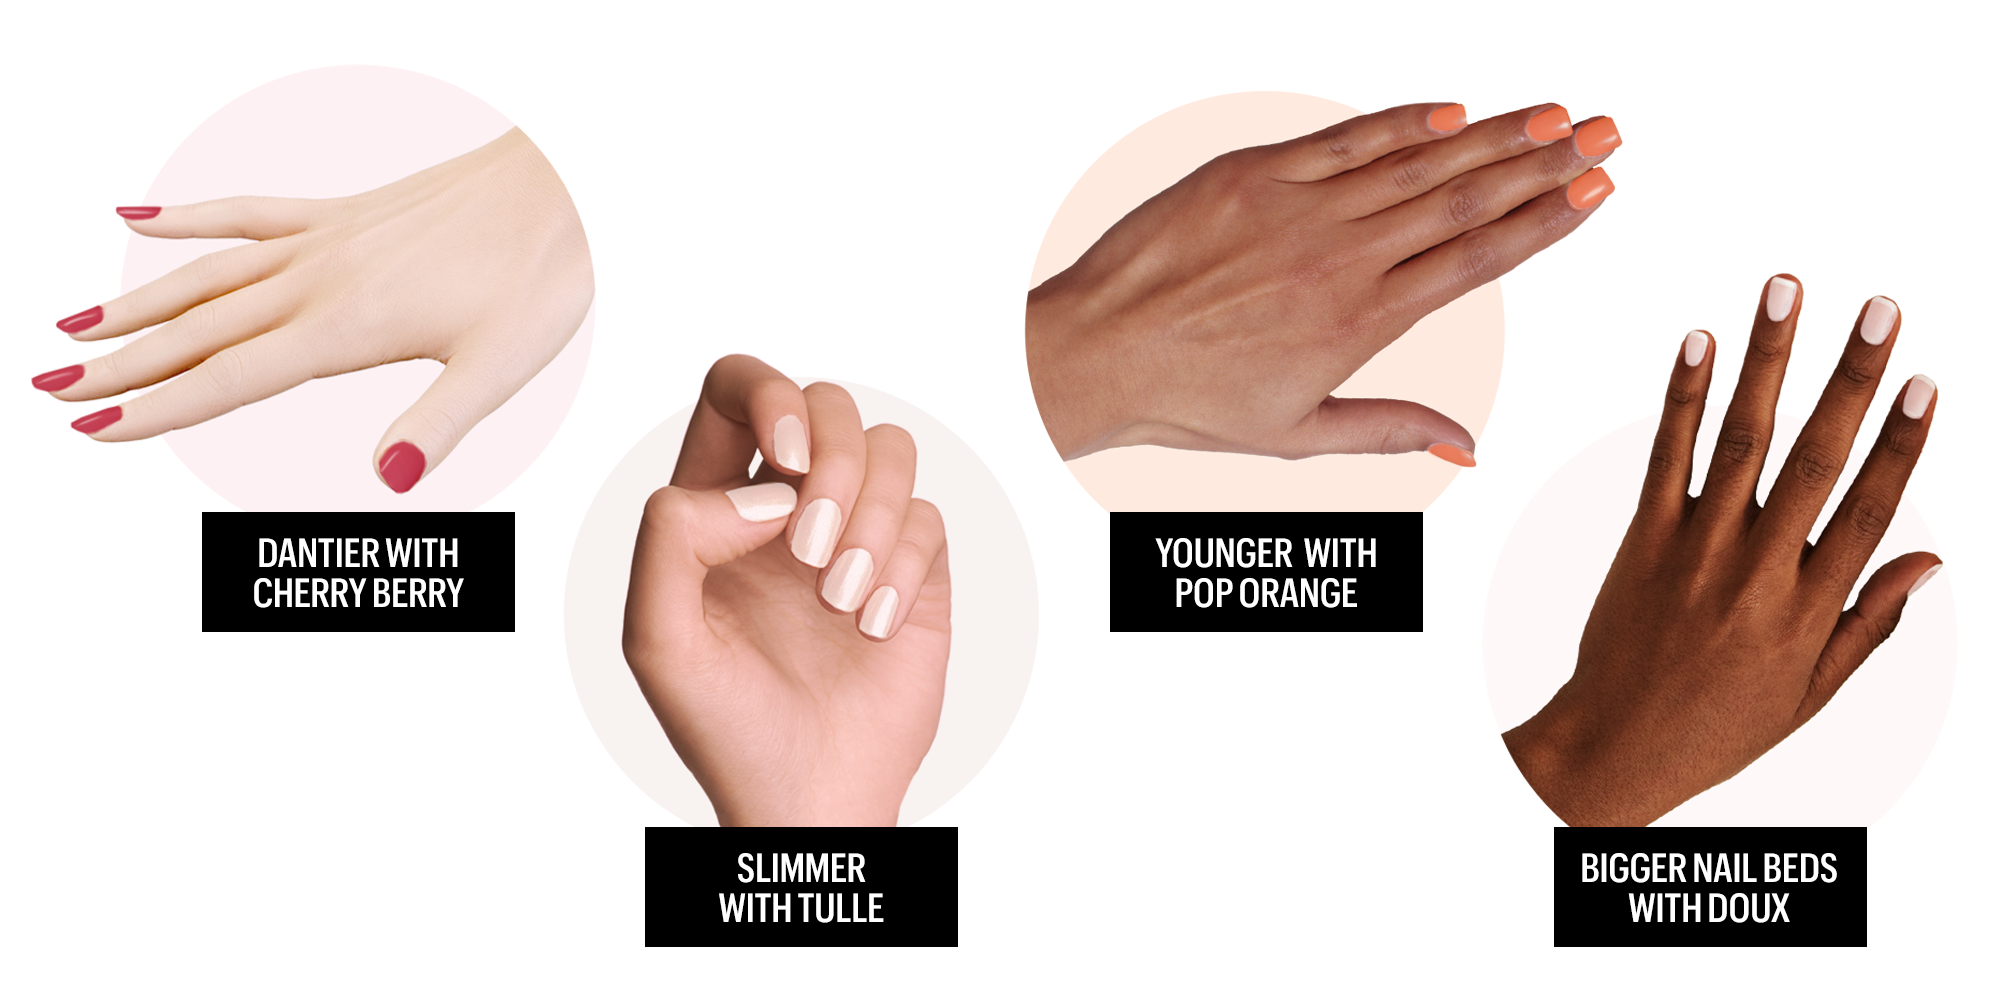 4. "The Most Flattering Nail Colors for Toes, According to Nail Experts" - wide 10